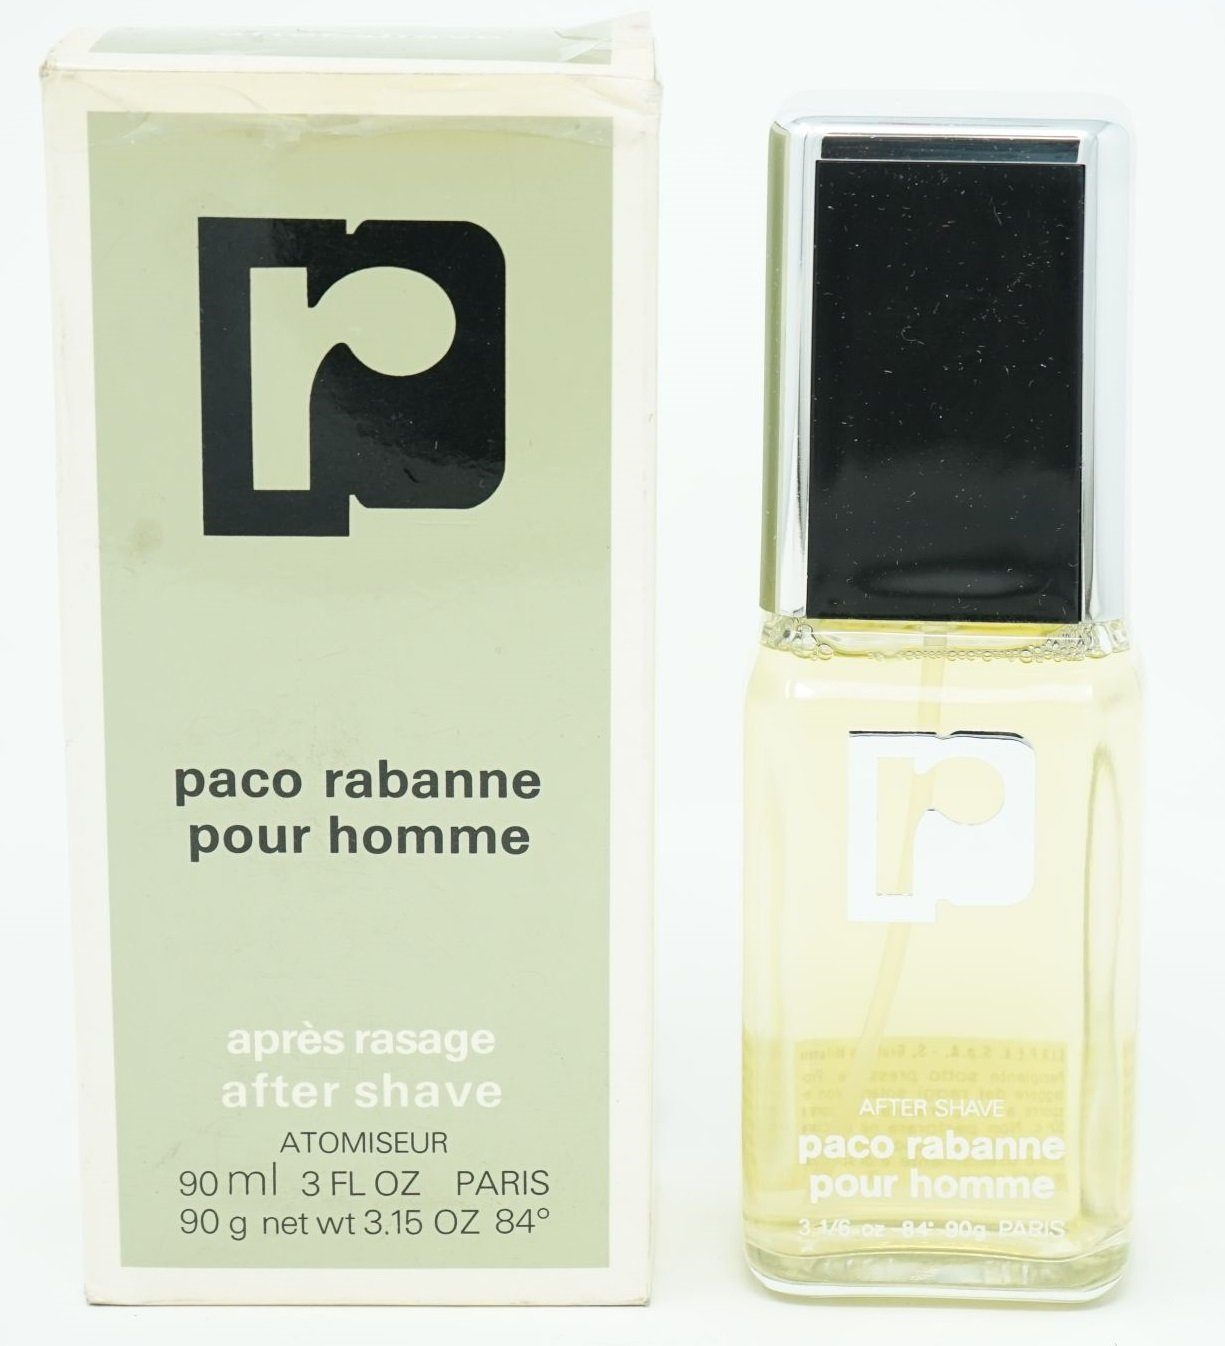 rabanne Atomiseur 90 Shave After Paco After-Shave ml Pour paco Homme Rabanne